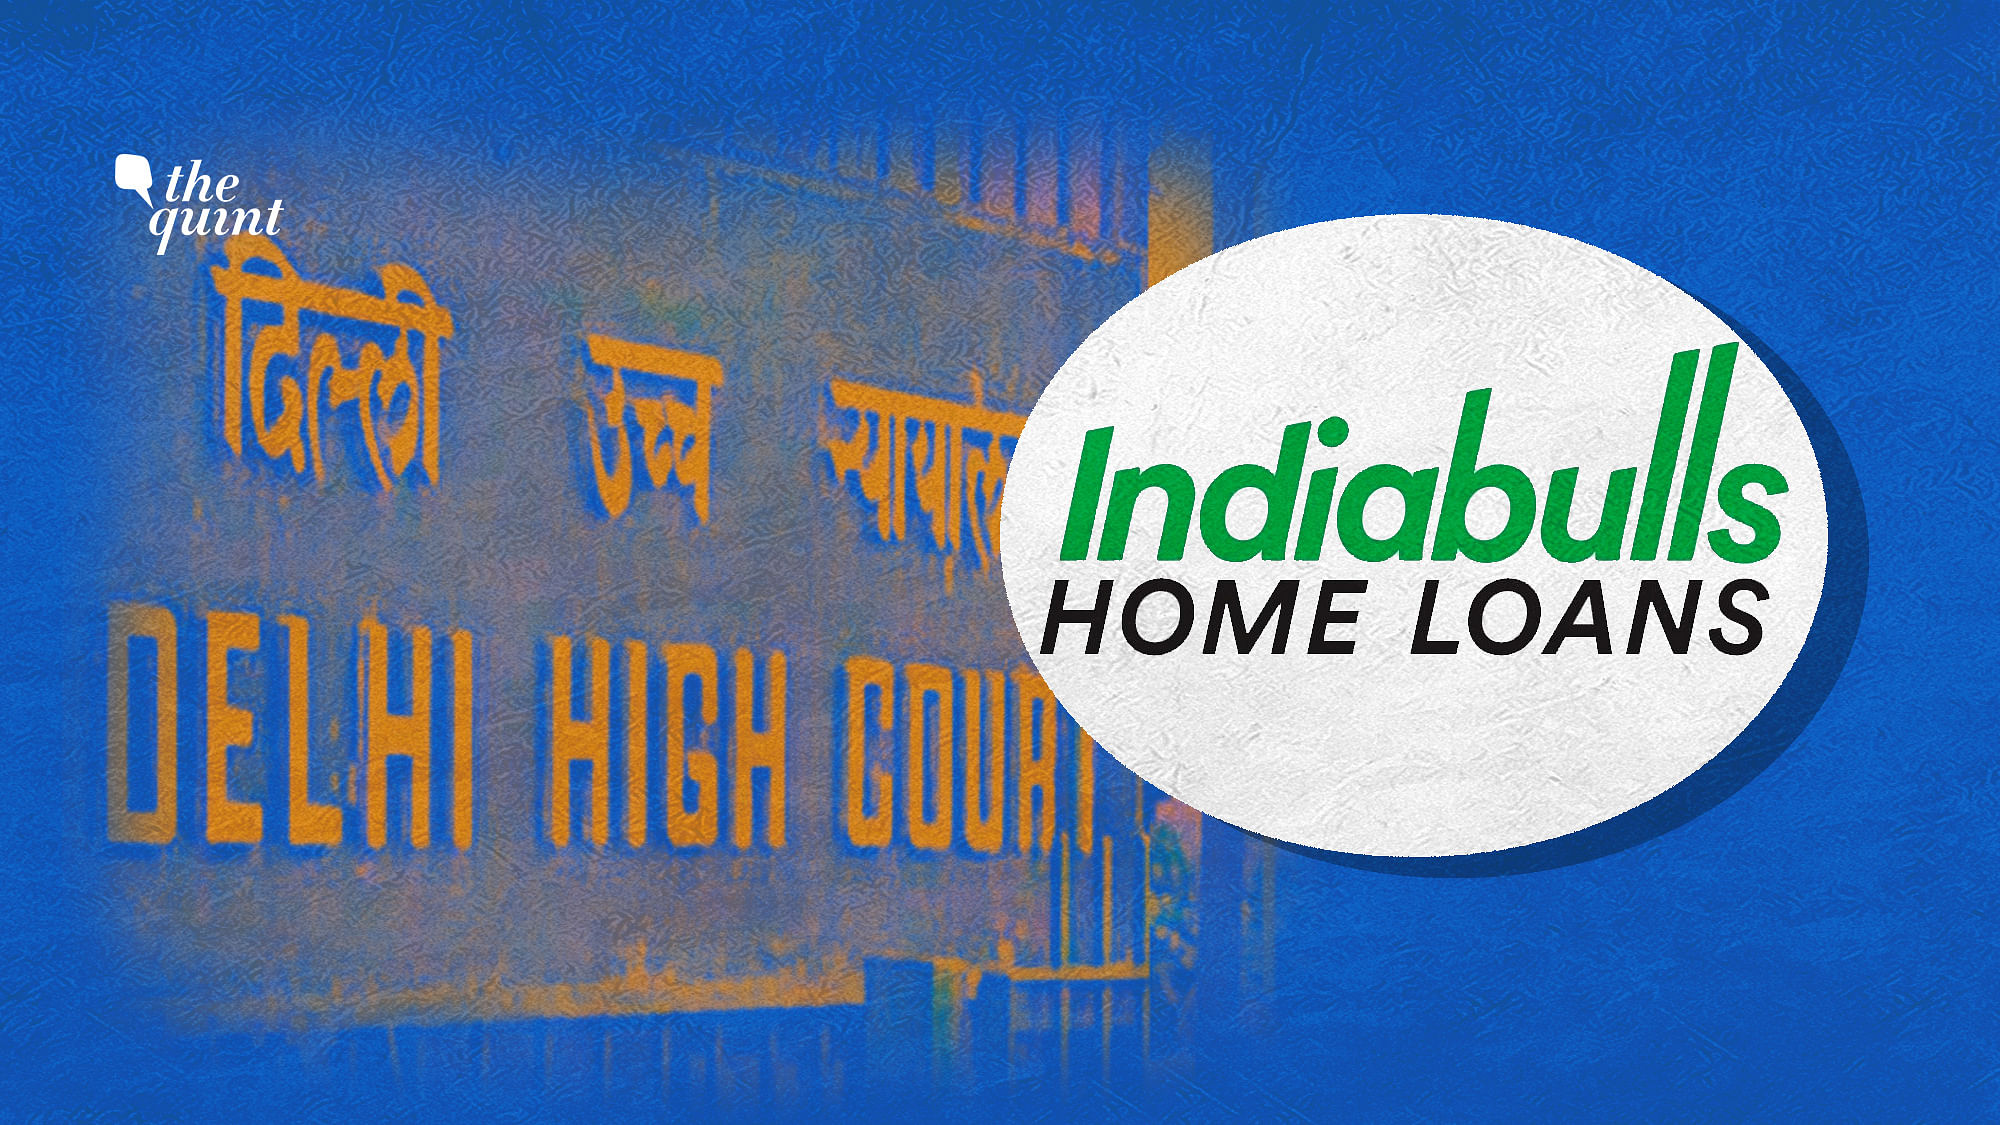 A Public Interest Litigation has been filed in the Delhi High Court accusing Indiabulls Housing Finance Limited (IBHFL) of perpetrating a scam to the tune of Rs 9,000 crore.